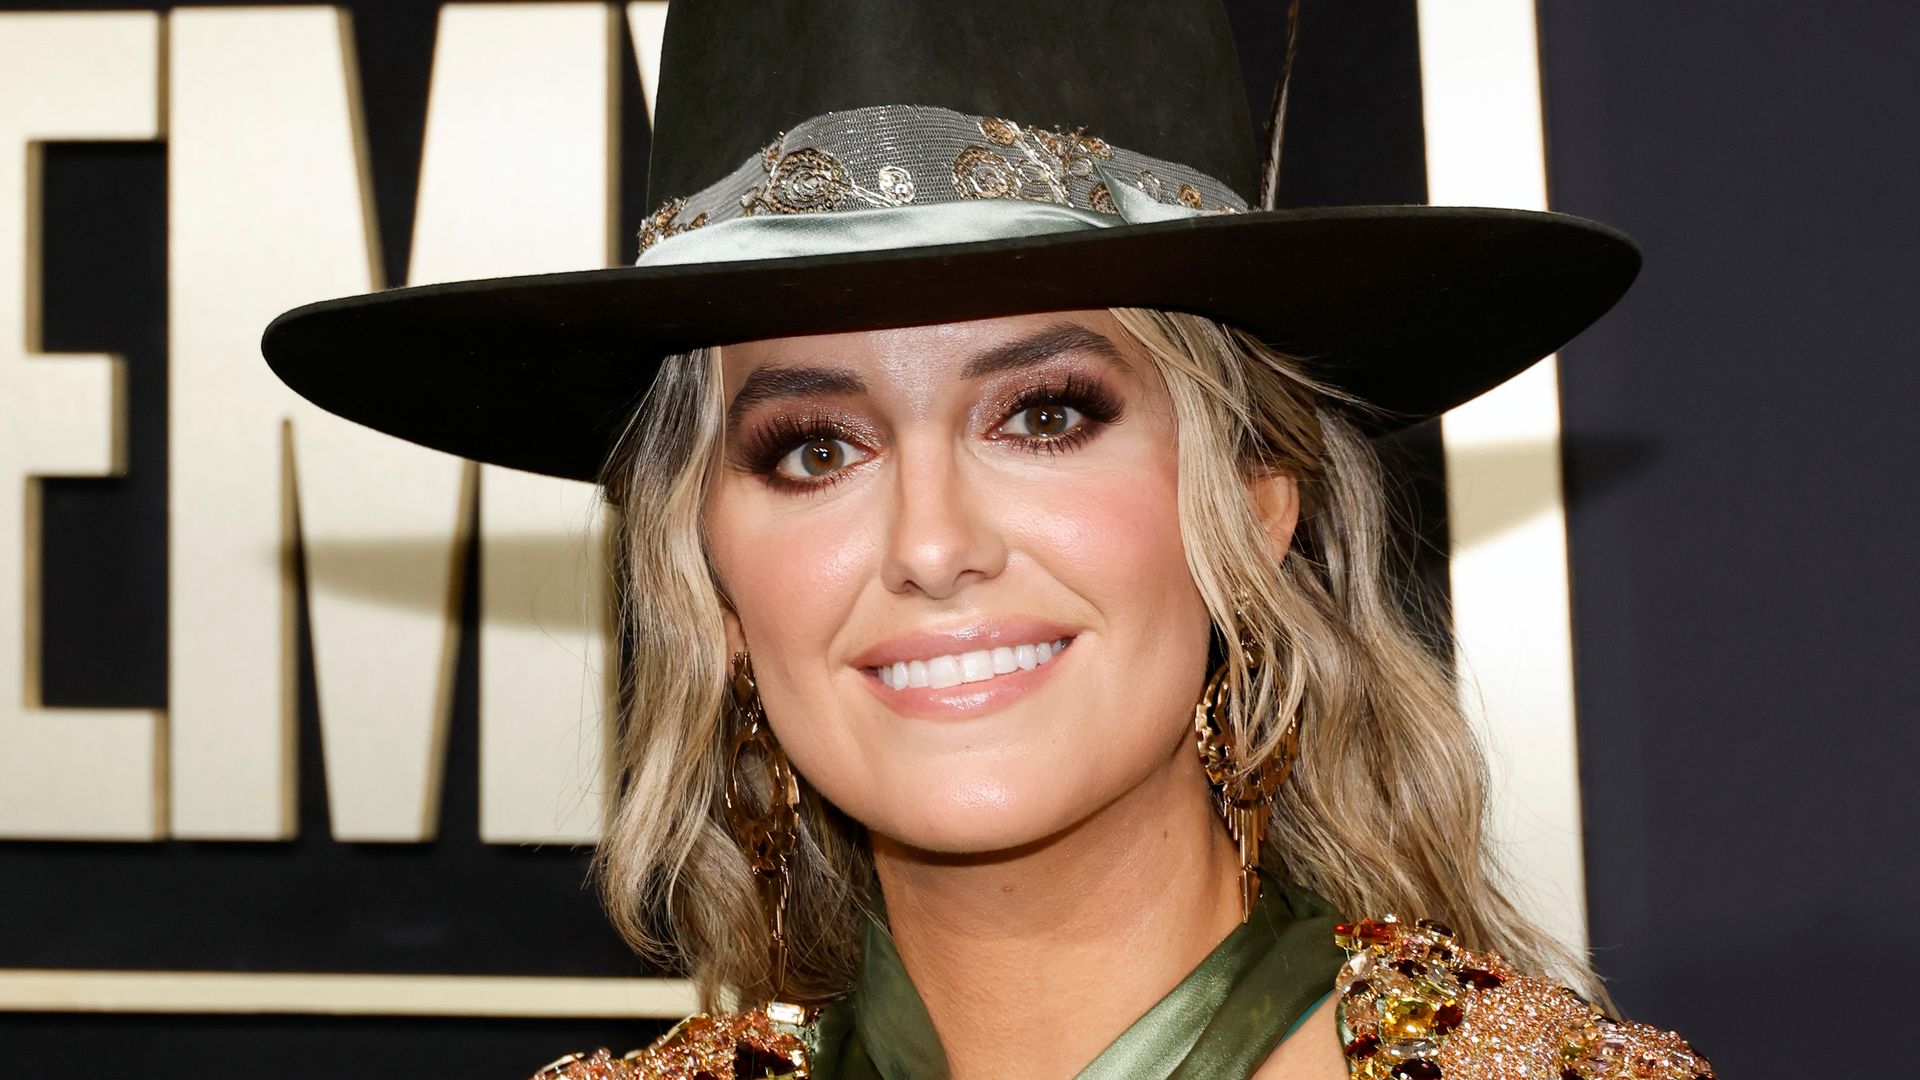 Lainey Wilson Gets Dramatic at ACM Awards 2023 in Green Jumpsuit Look